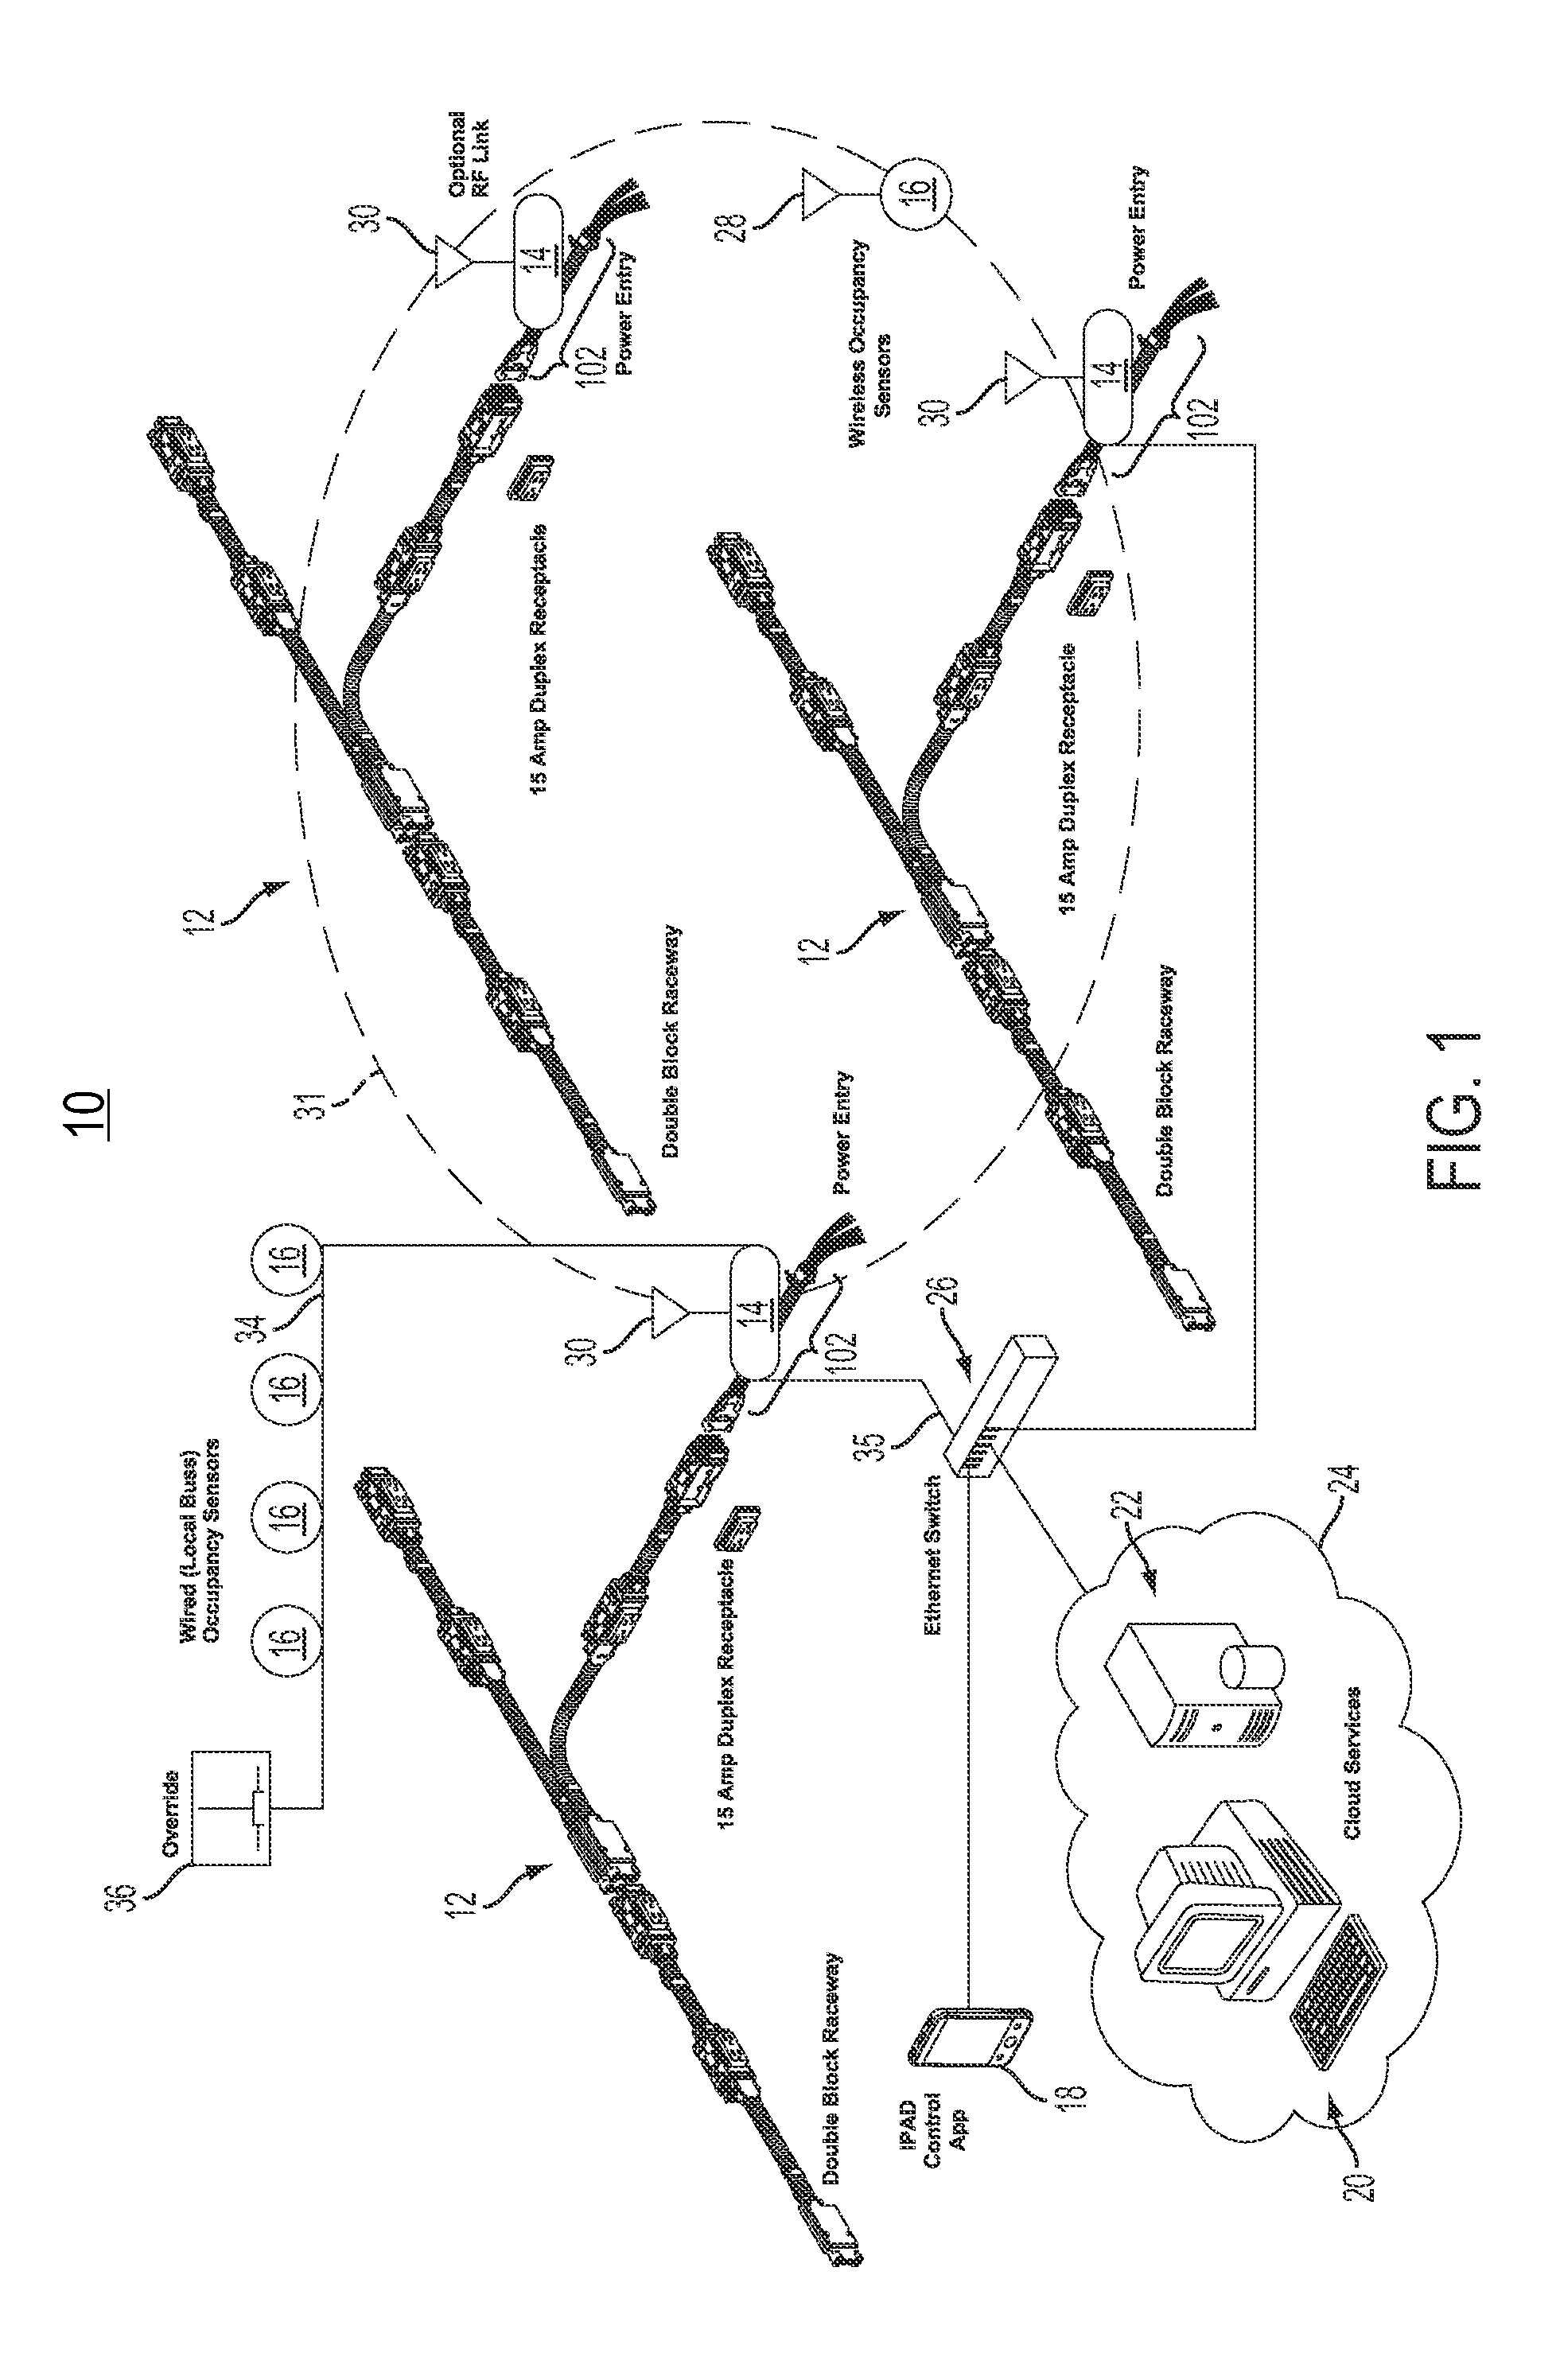 Electrical energy management and monitoring system, and method